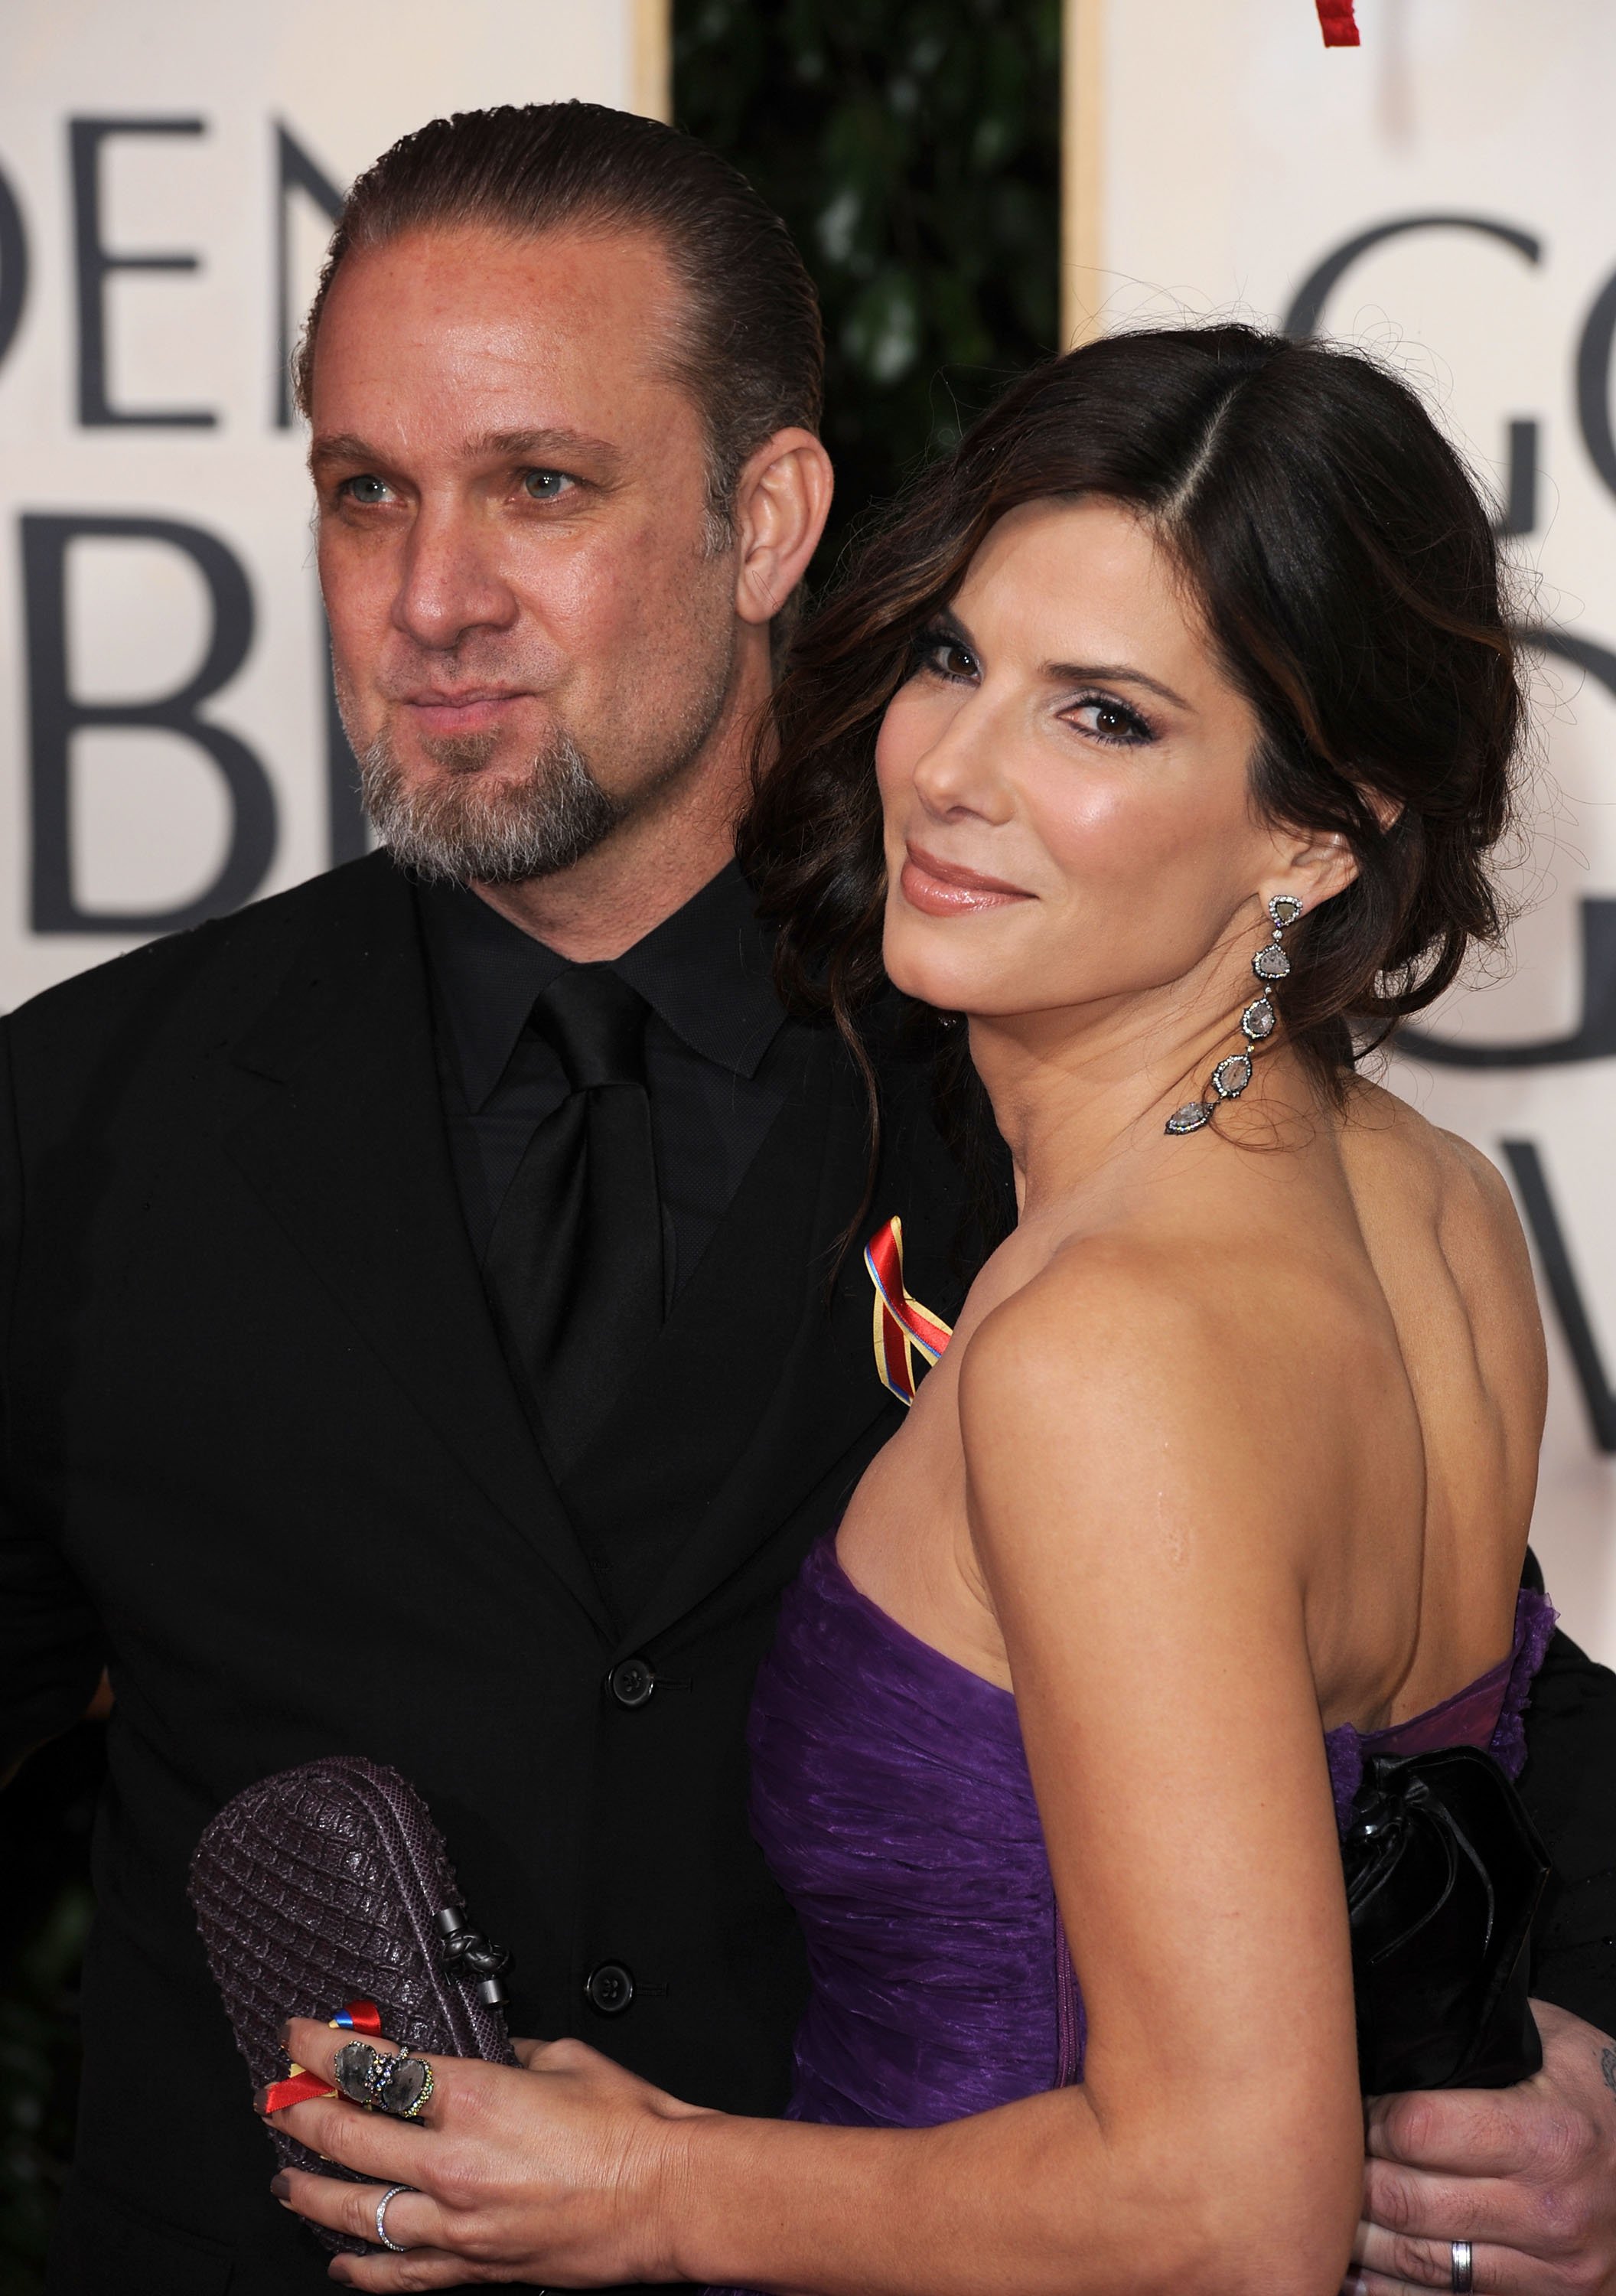 Jesse James and wife Sandra Bullock arriving at the 67th Annual Golden Globe Awards at The Beverly Hilton Hotel on January 17, 2010 in Beverly Hills, California. / Source: Getty Images